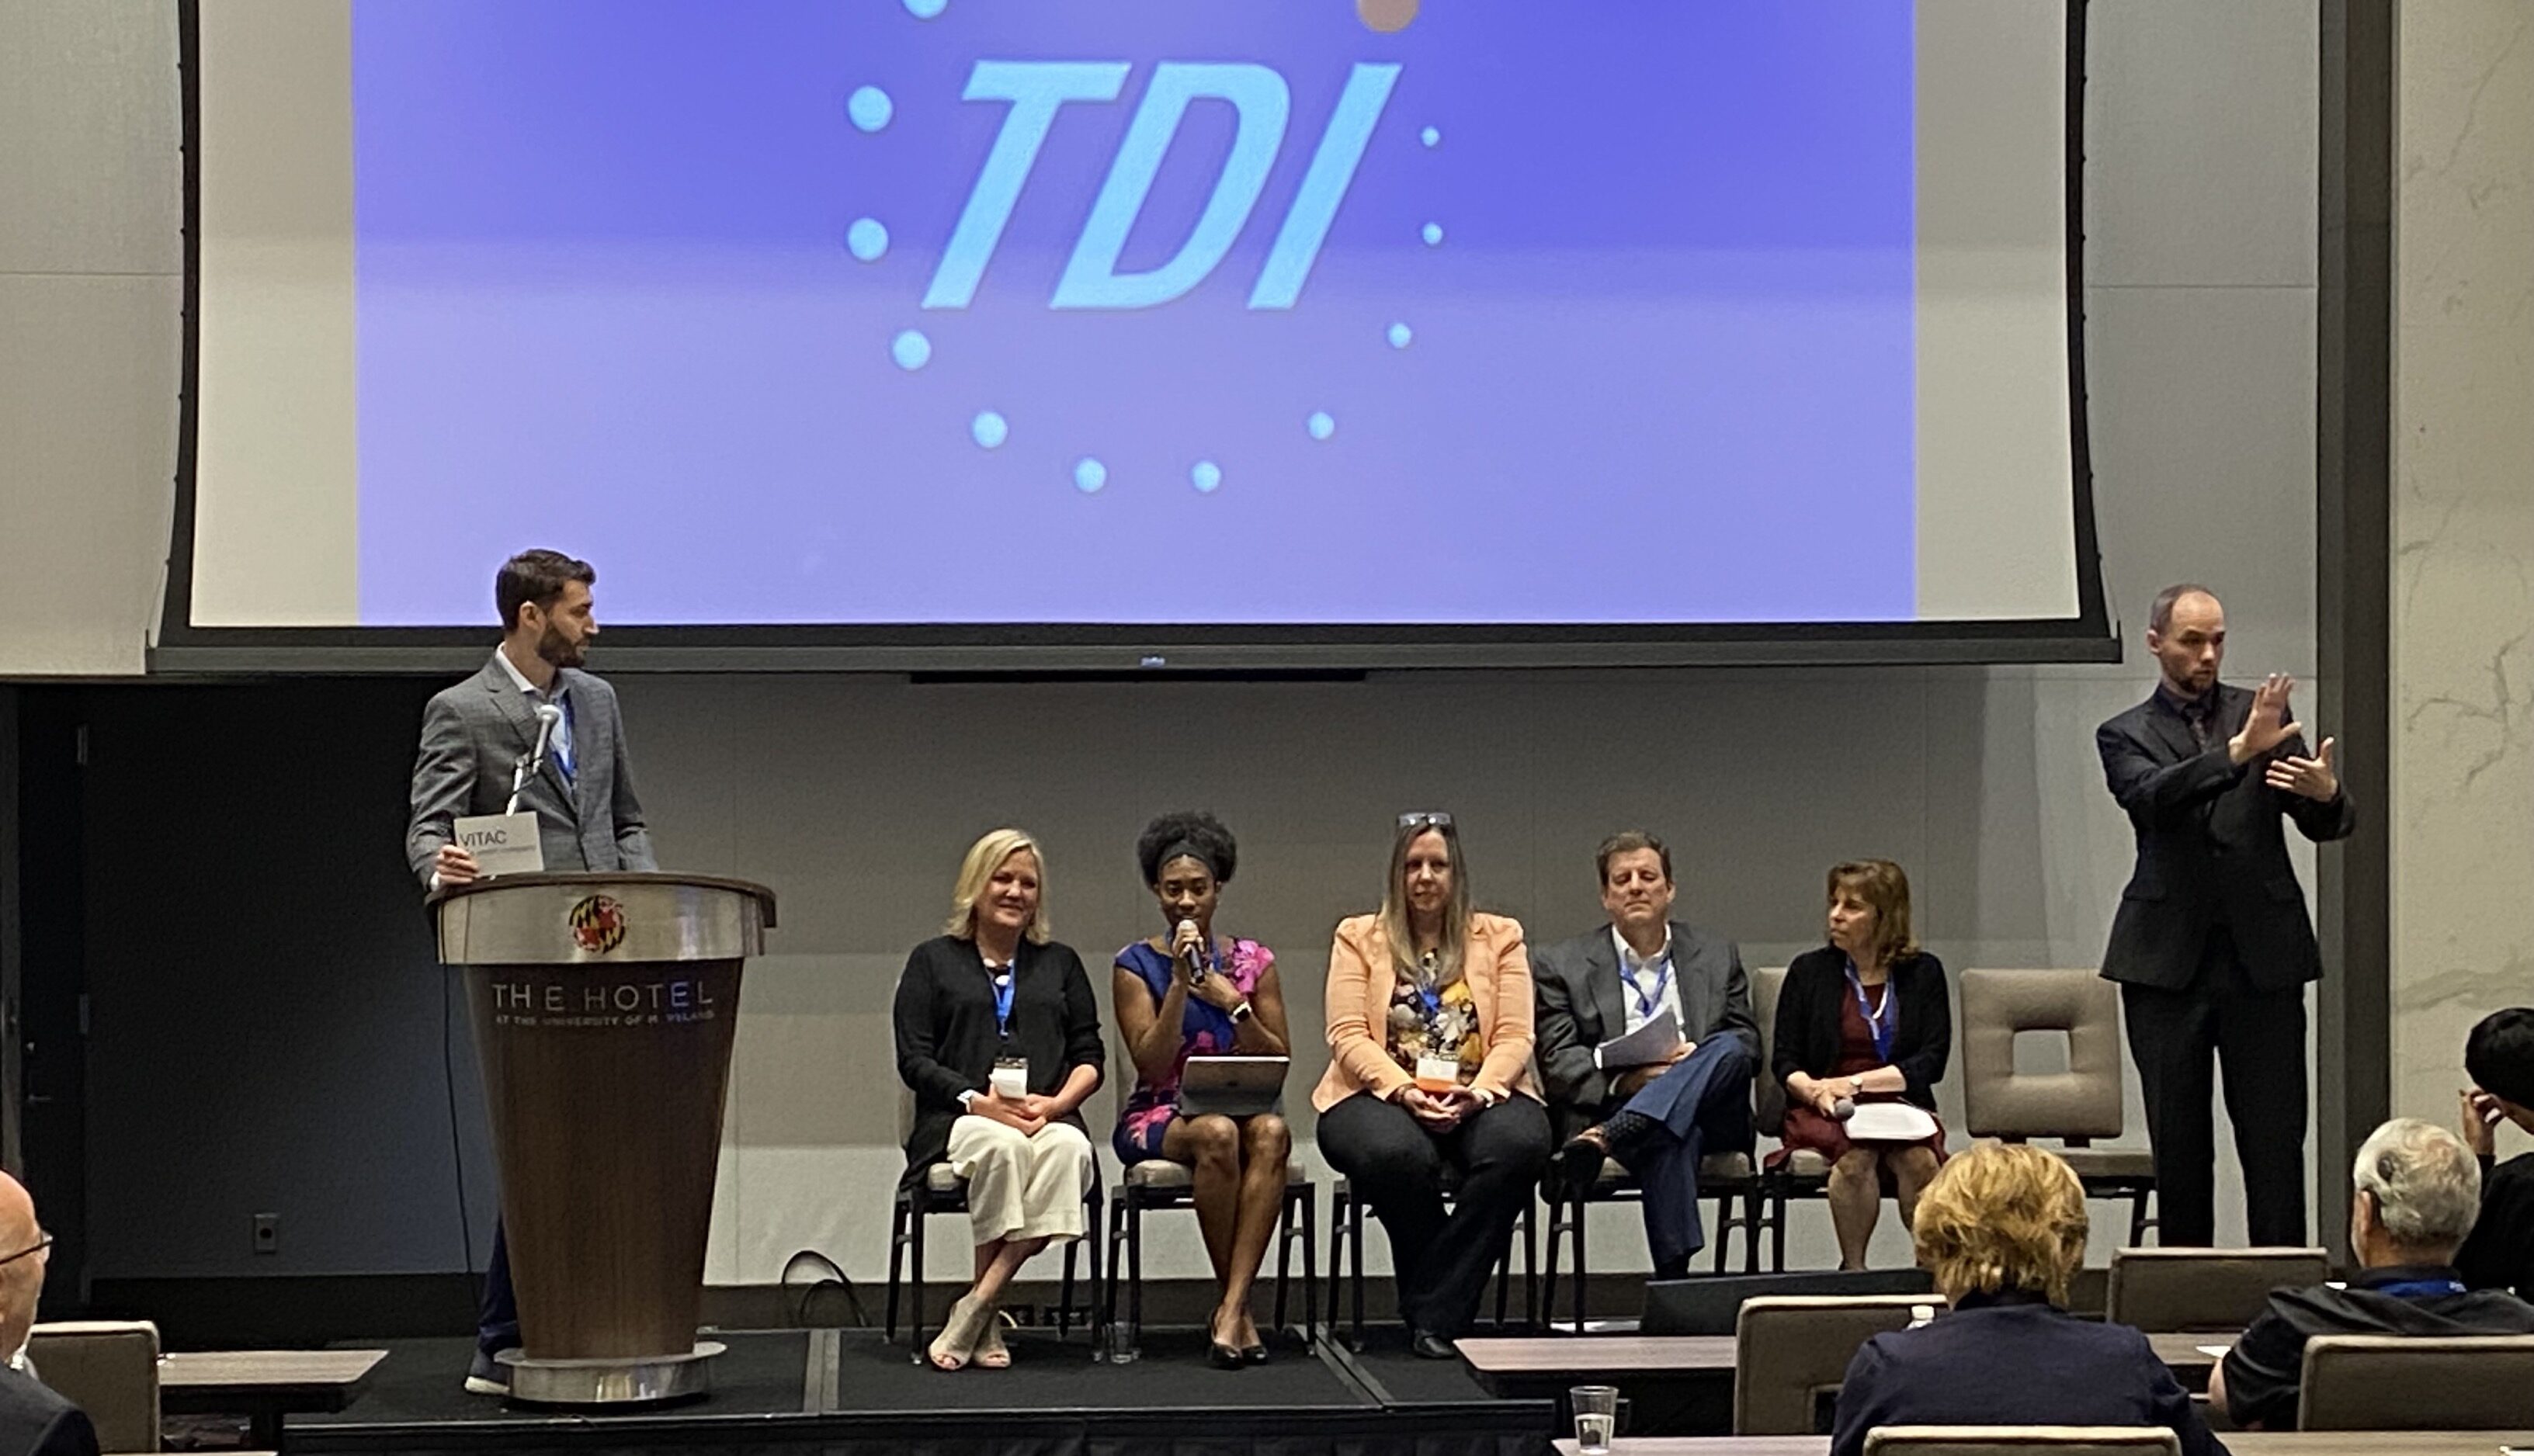 Matthew Schwartz of Verbit moderates an event at TDI, Heather York, Crystal Evans, Stacey Romero, Larry Walke and Darlene Parker are sitting and participating while an ASL interpreter signs to the audience